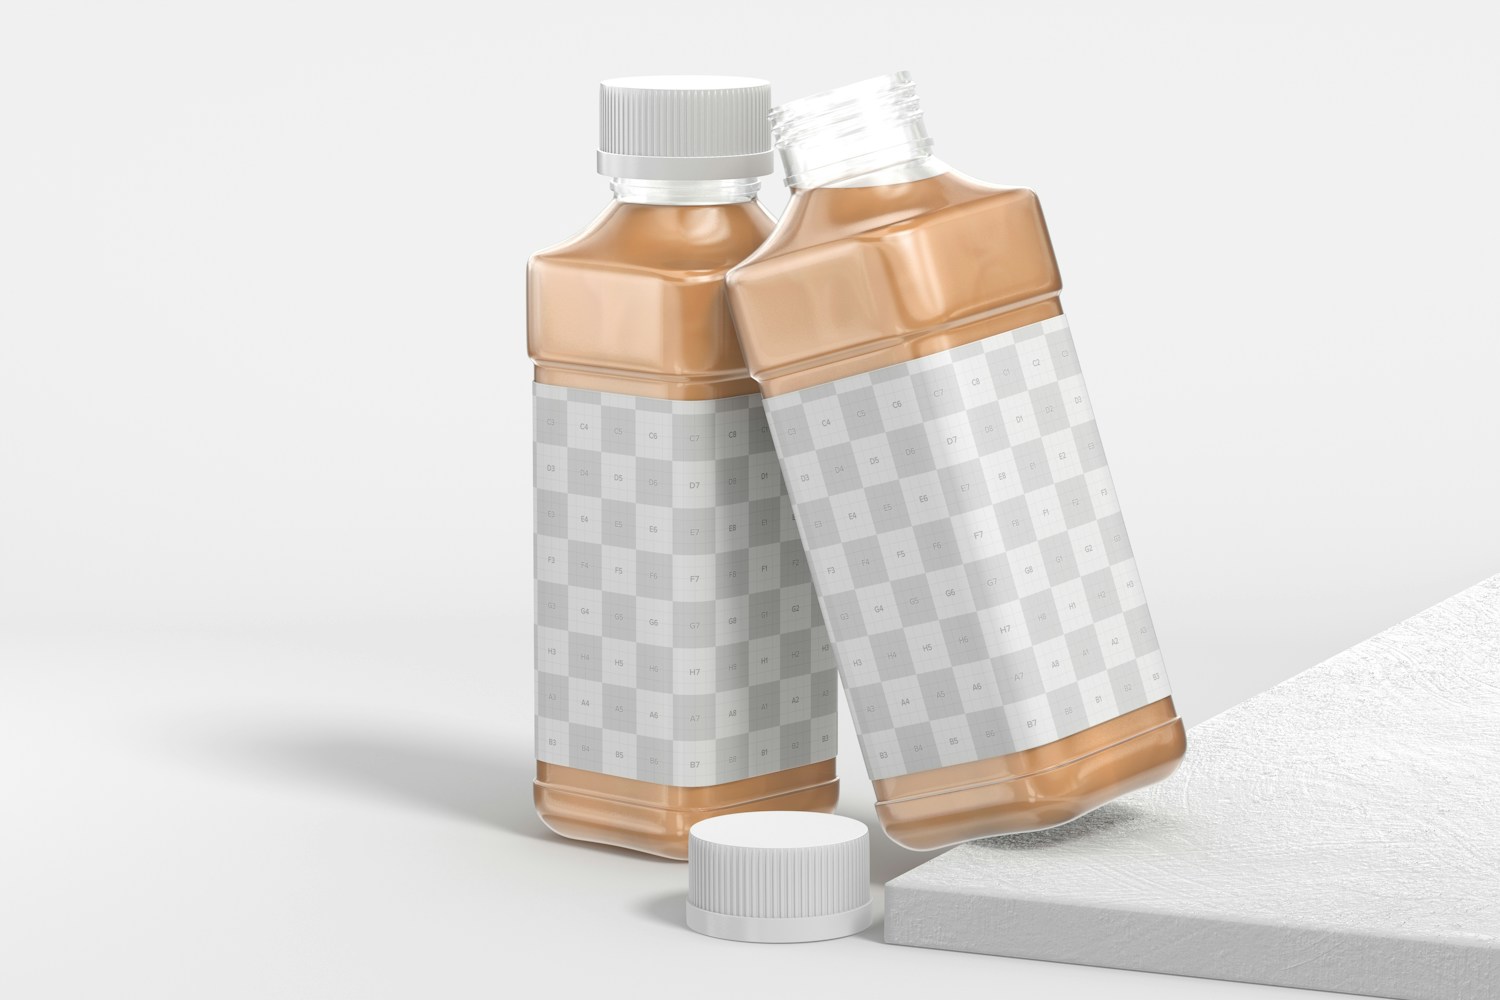 16 oz Iced Coffee Bottles Mockup, Opened and Closed